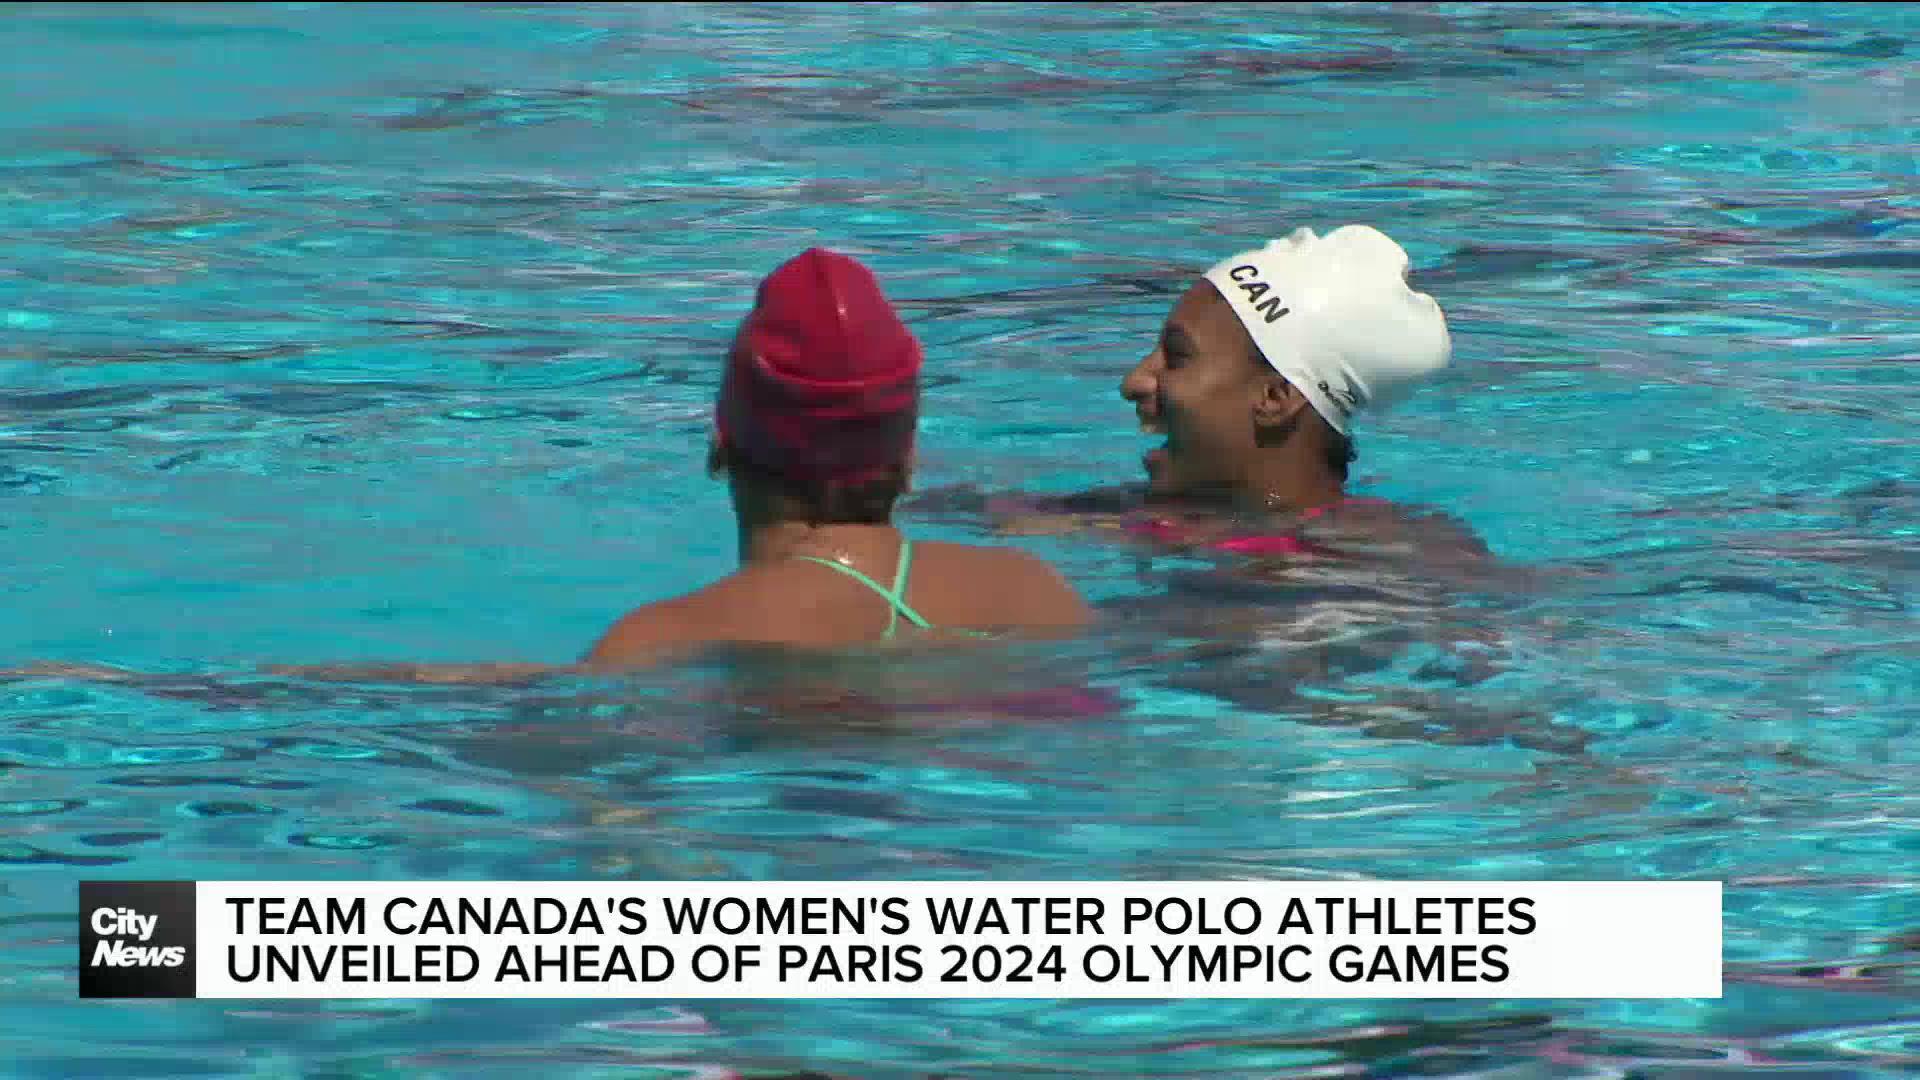 Canada’s women's water polo team unveiled ahead of Paris 2024 games